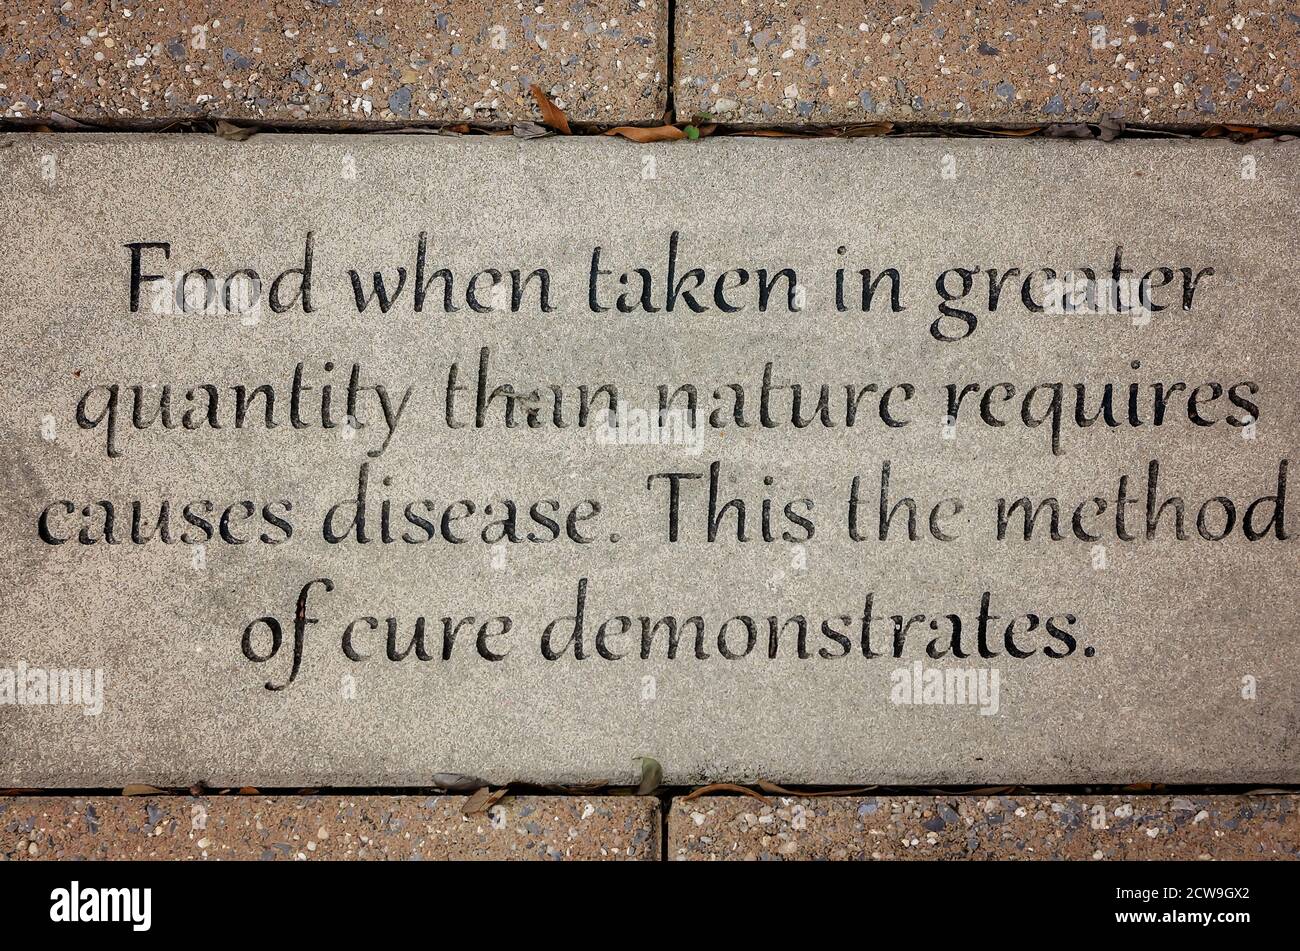 A quote from Hippocrates is inscribed in concrete on the campus of the University of South Alabama, Sept. 26, 2020, in Mobile, Alabama. Stock Photo